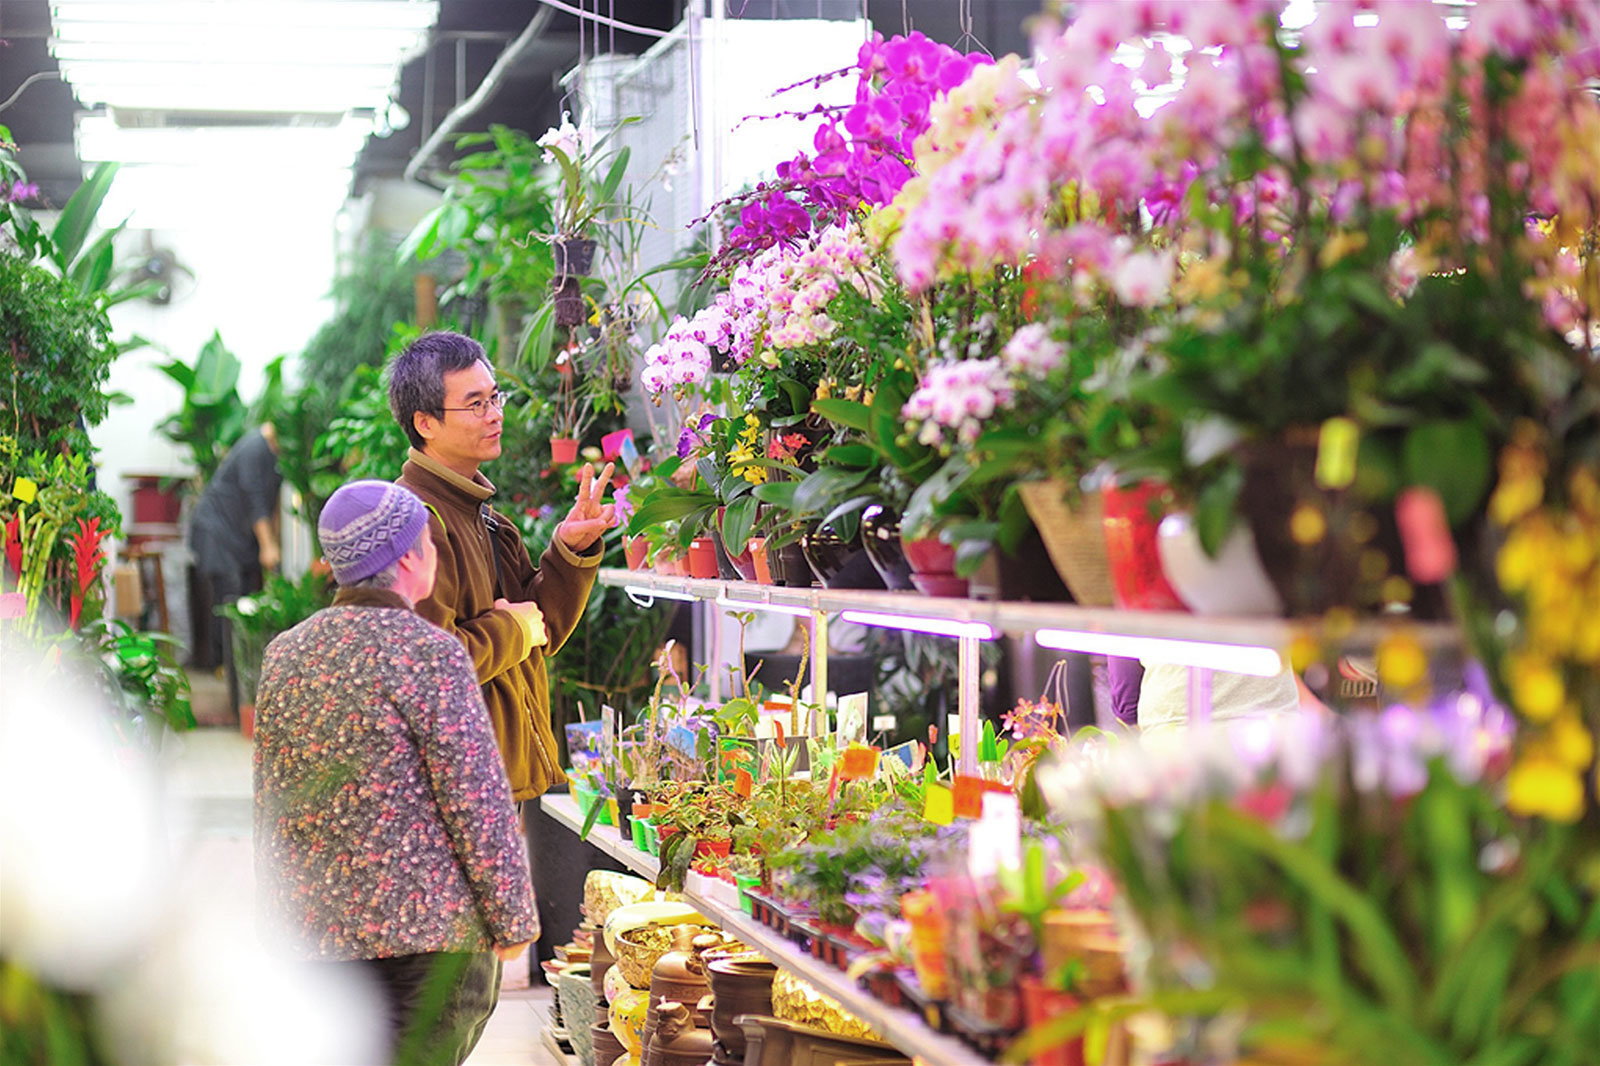 Visiting flower markets is a popular thing to do during Chinese New Year in Hong Kong